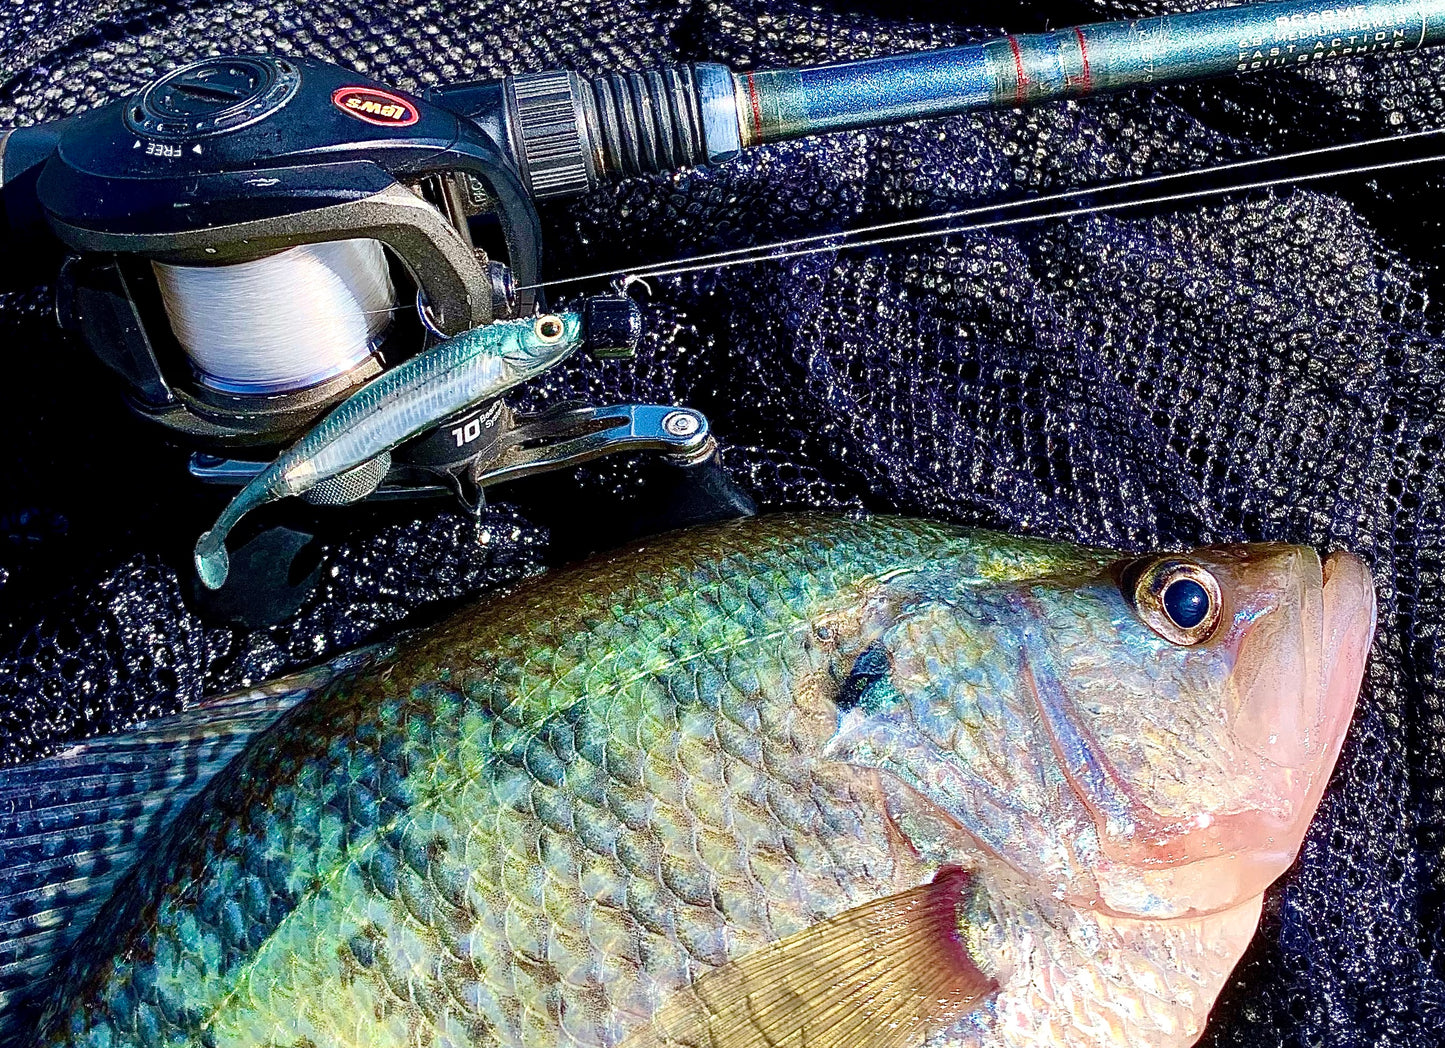 Swimbaits For Crappie - CRAPPIE - Rambling Angler Outdoors